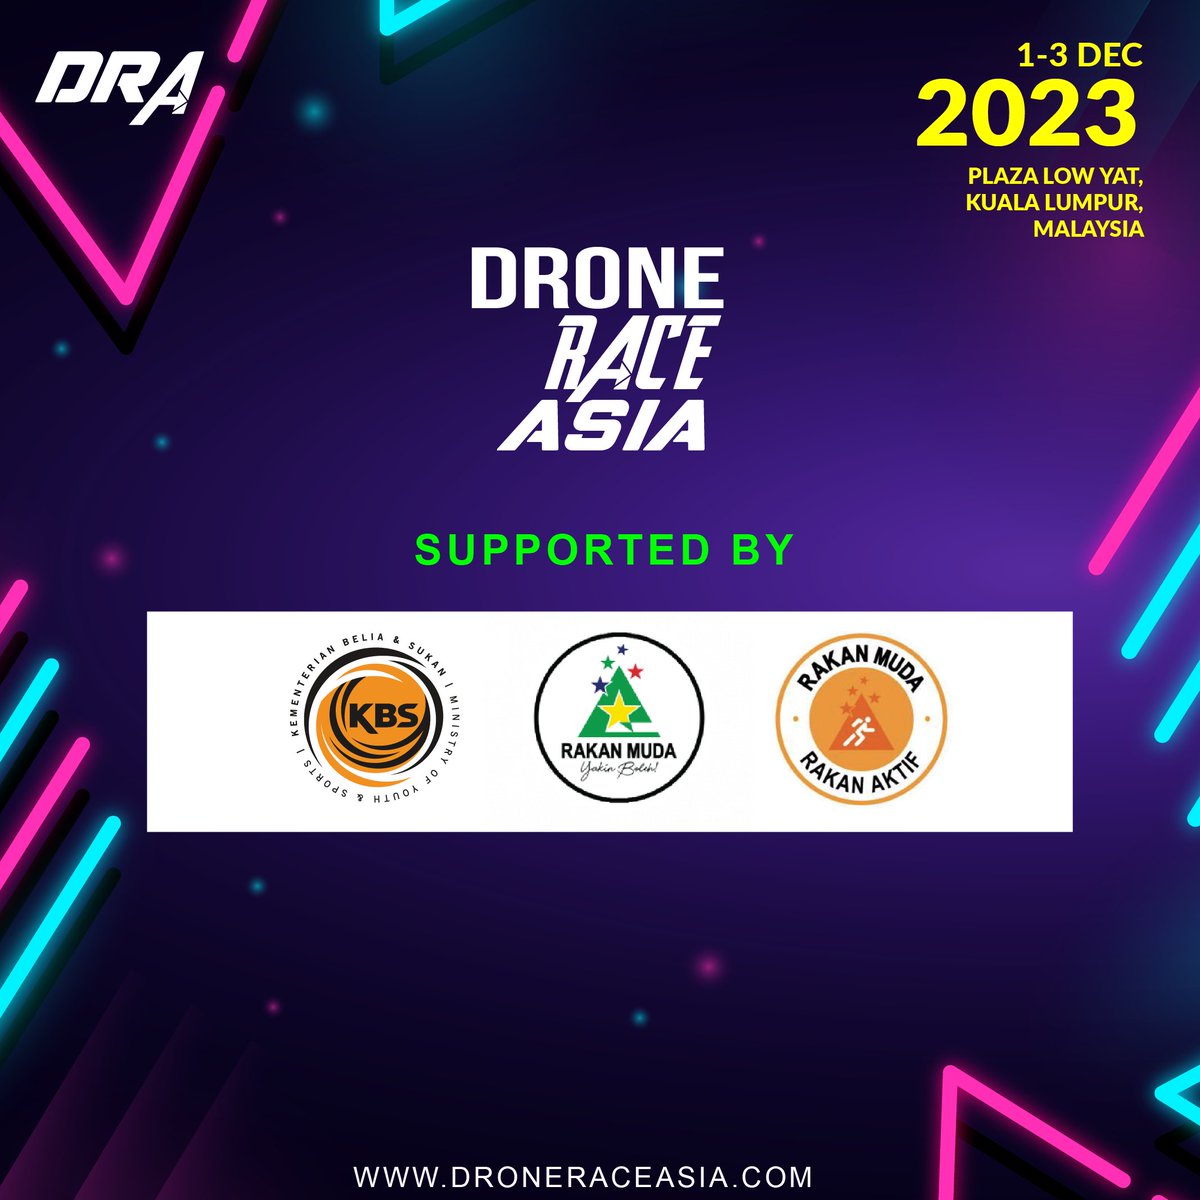 We are grateful to the Ministry of Sports and Youth Malaysia (KBS) for their invaluable support as our esteemed partners for the Drone Race Asia (DRA) International Championship 2023, alongside Rakan Muda. 🚀🌟#KBS #DroneRaceAsia #DRA #RakanMuda #Gratitude